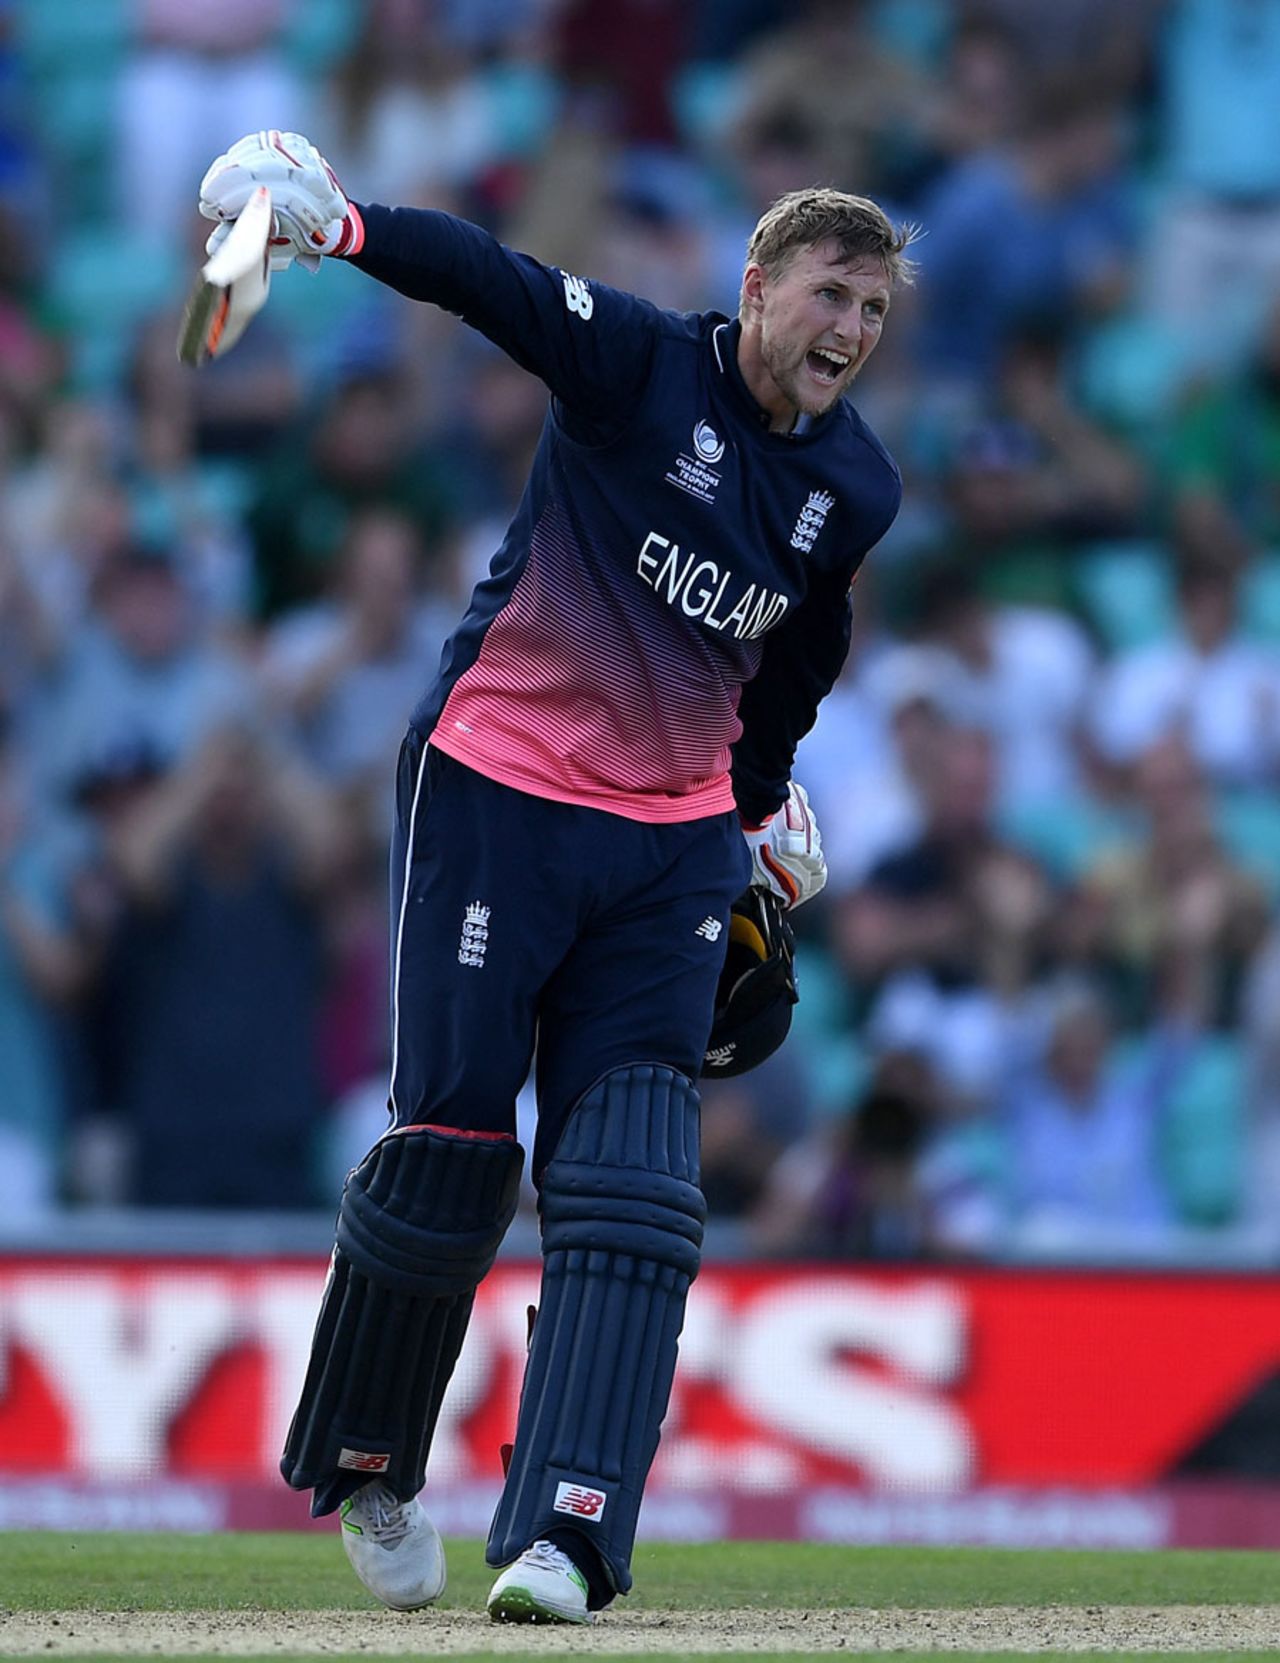 Joe Root celebrates his hundred, England v Bangladesh, Champions Trophy, Group A, The Oval, June 1, 2017